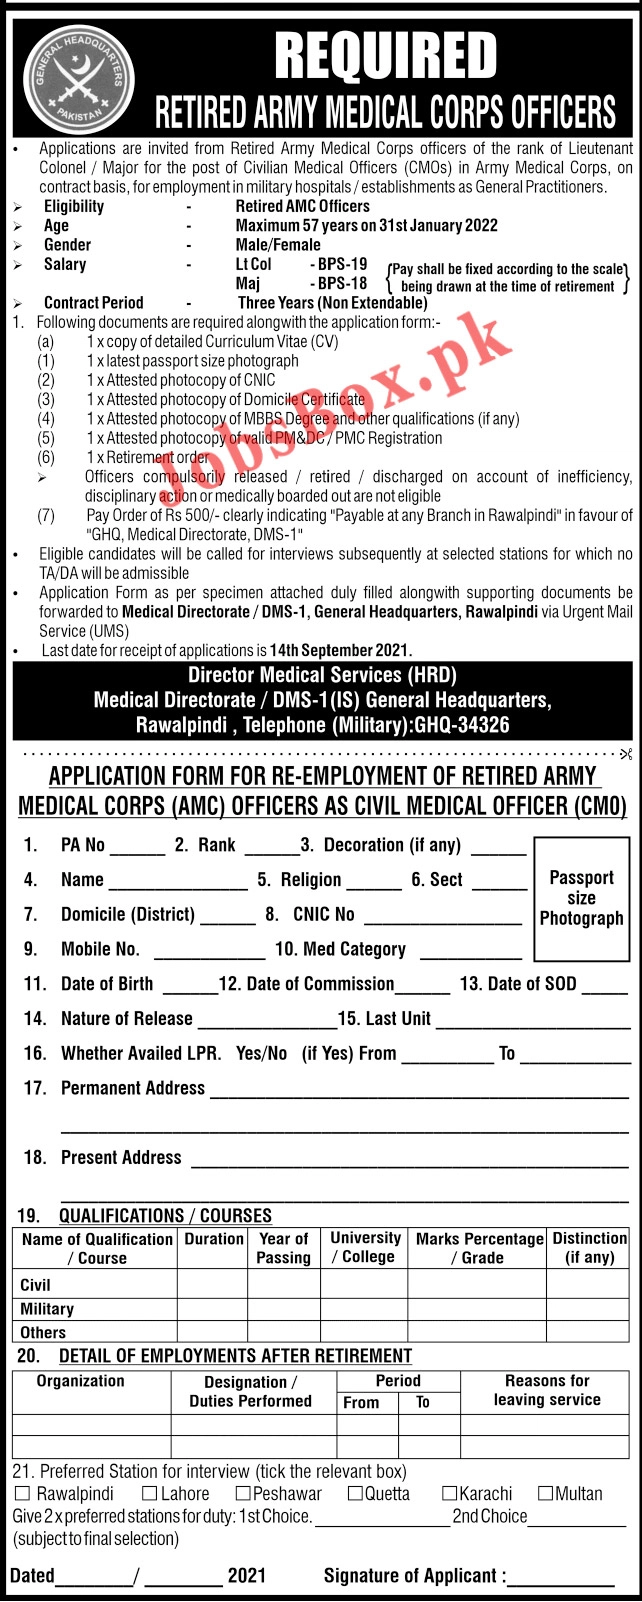 Join Pak Army Civilian Medical Officers Jobs 2021 - Application Form